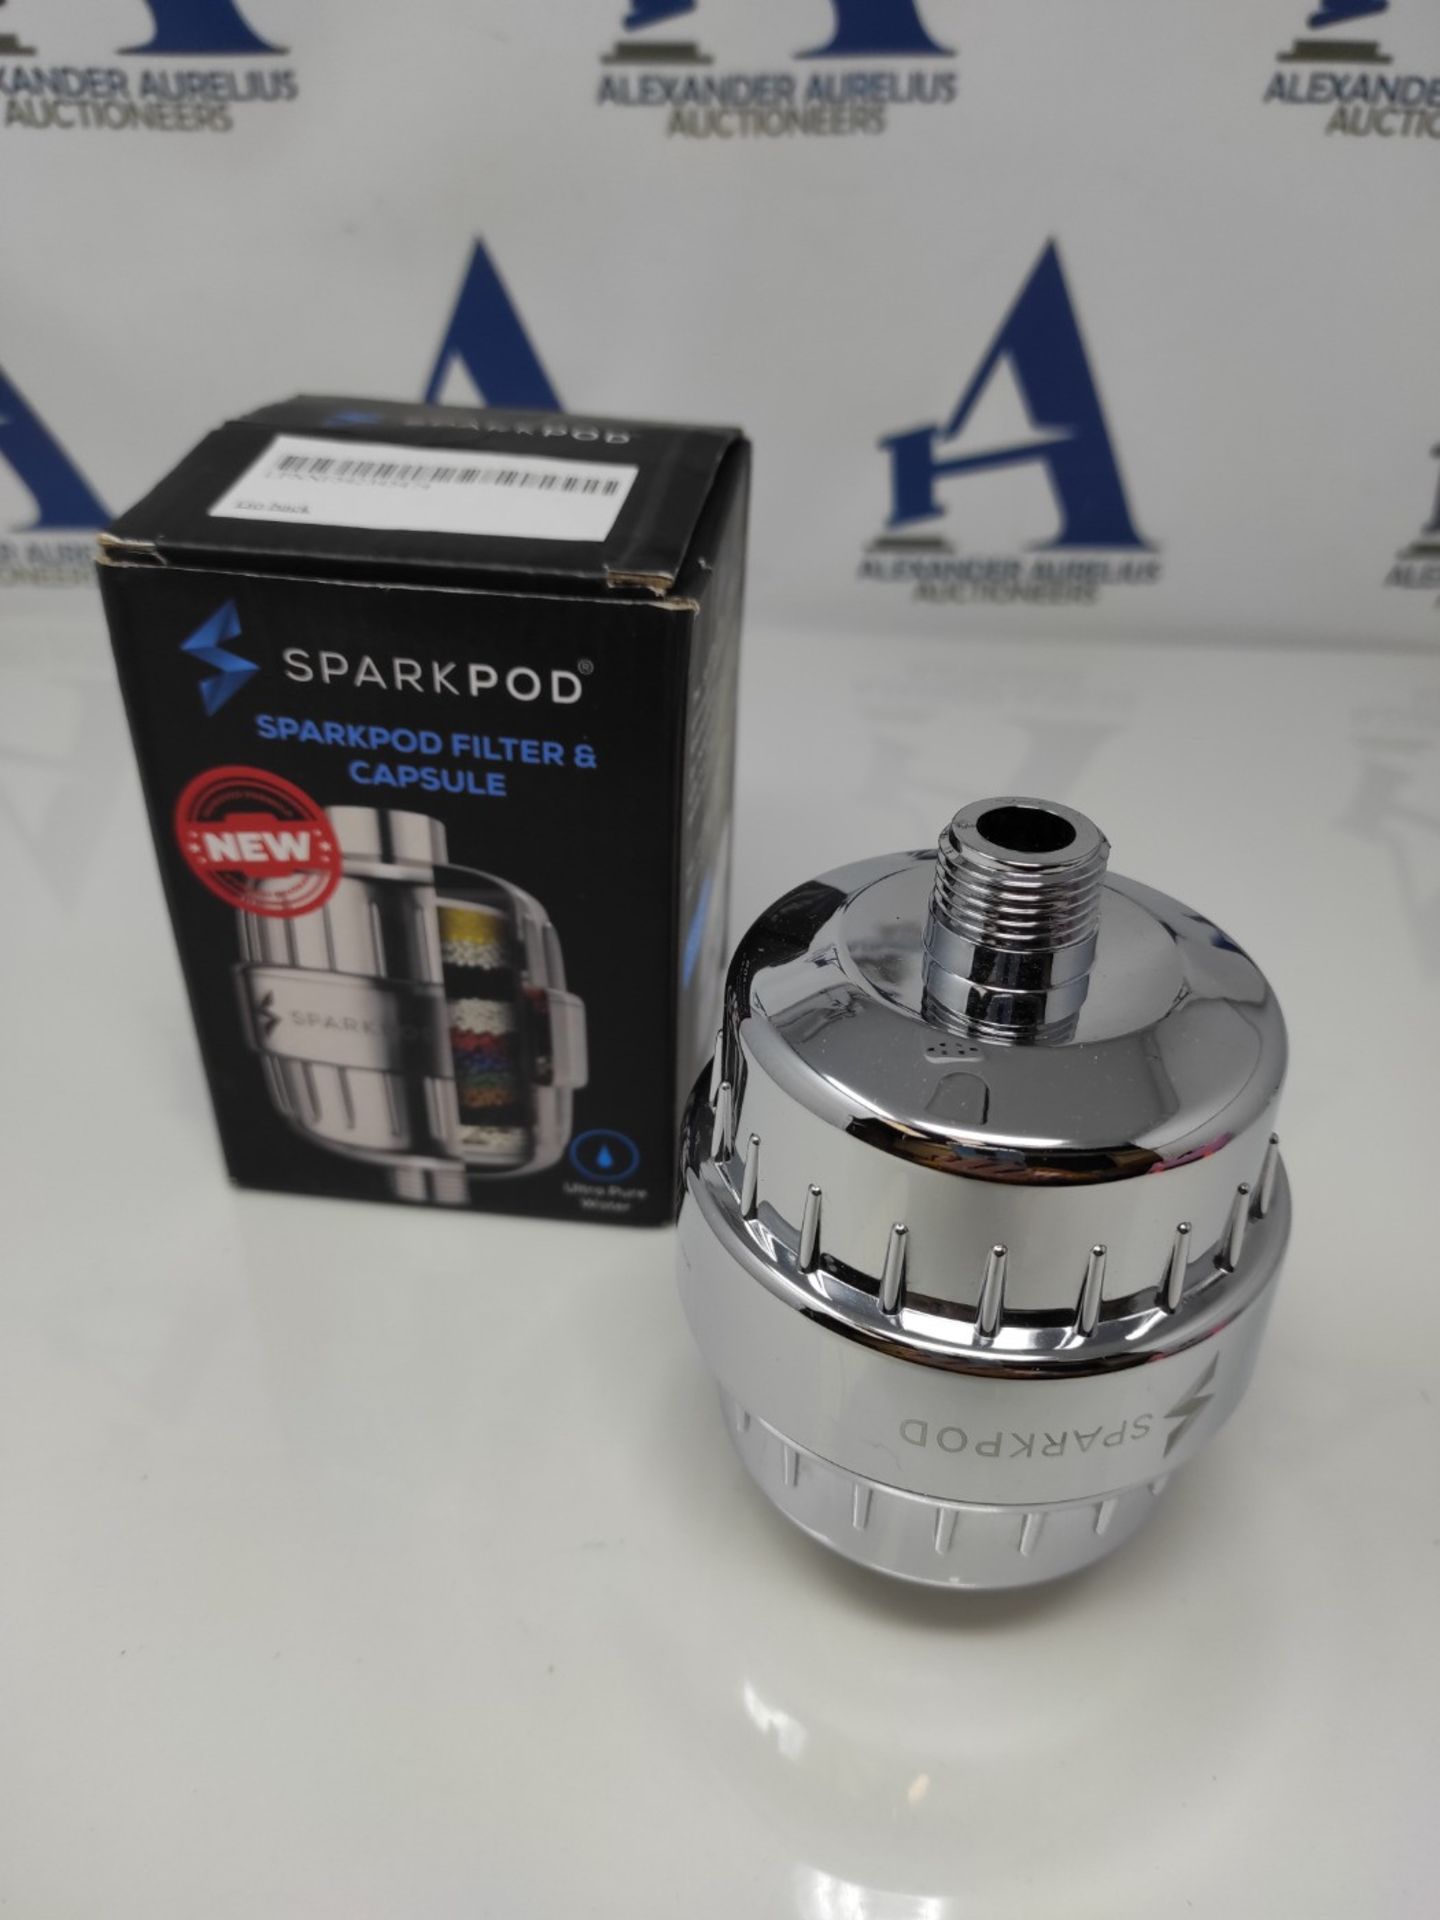 SparkPod High Output Shower Filter Capsule- Rejuvenates Skin and Hair Health (Reduces - Image 2 of 2